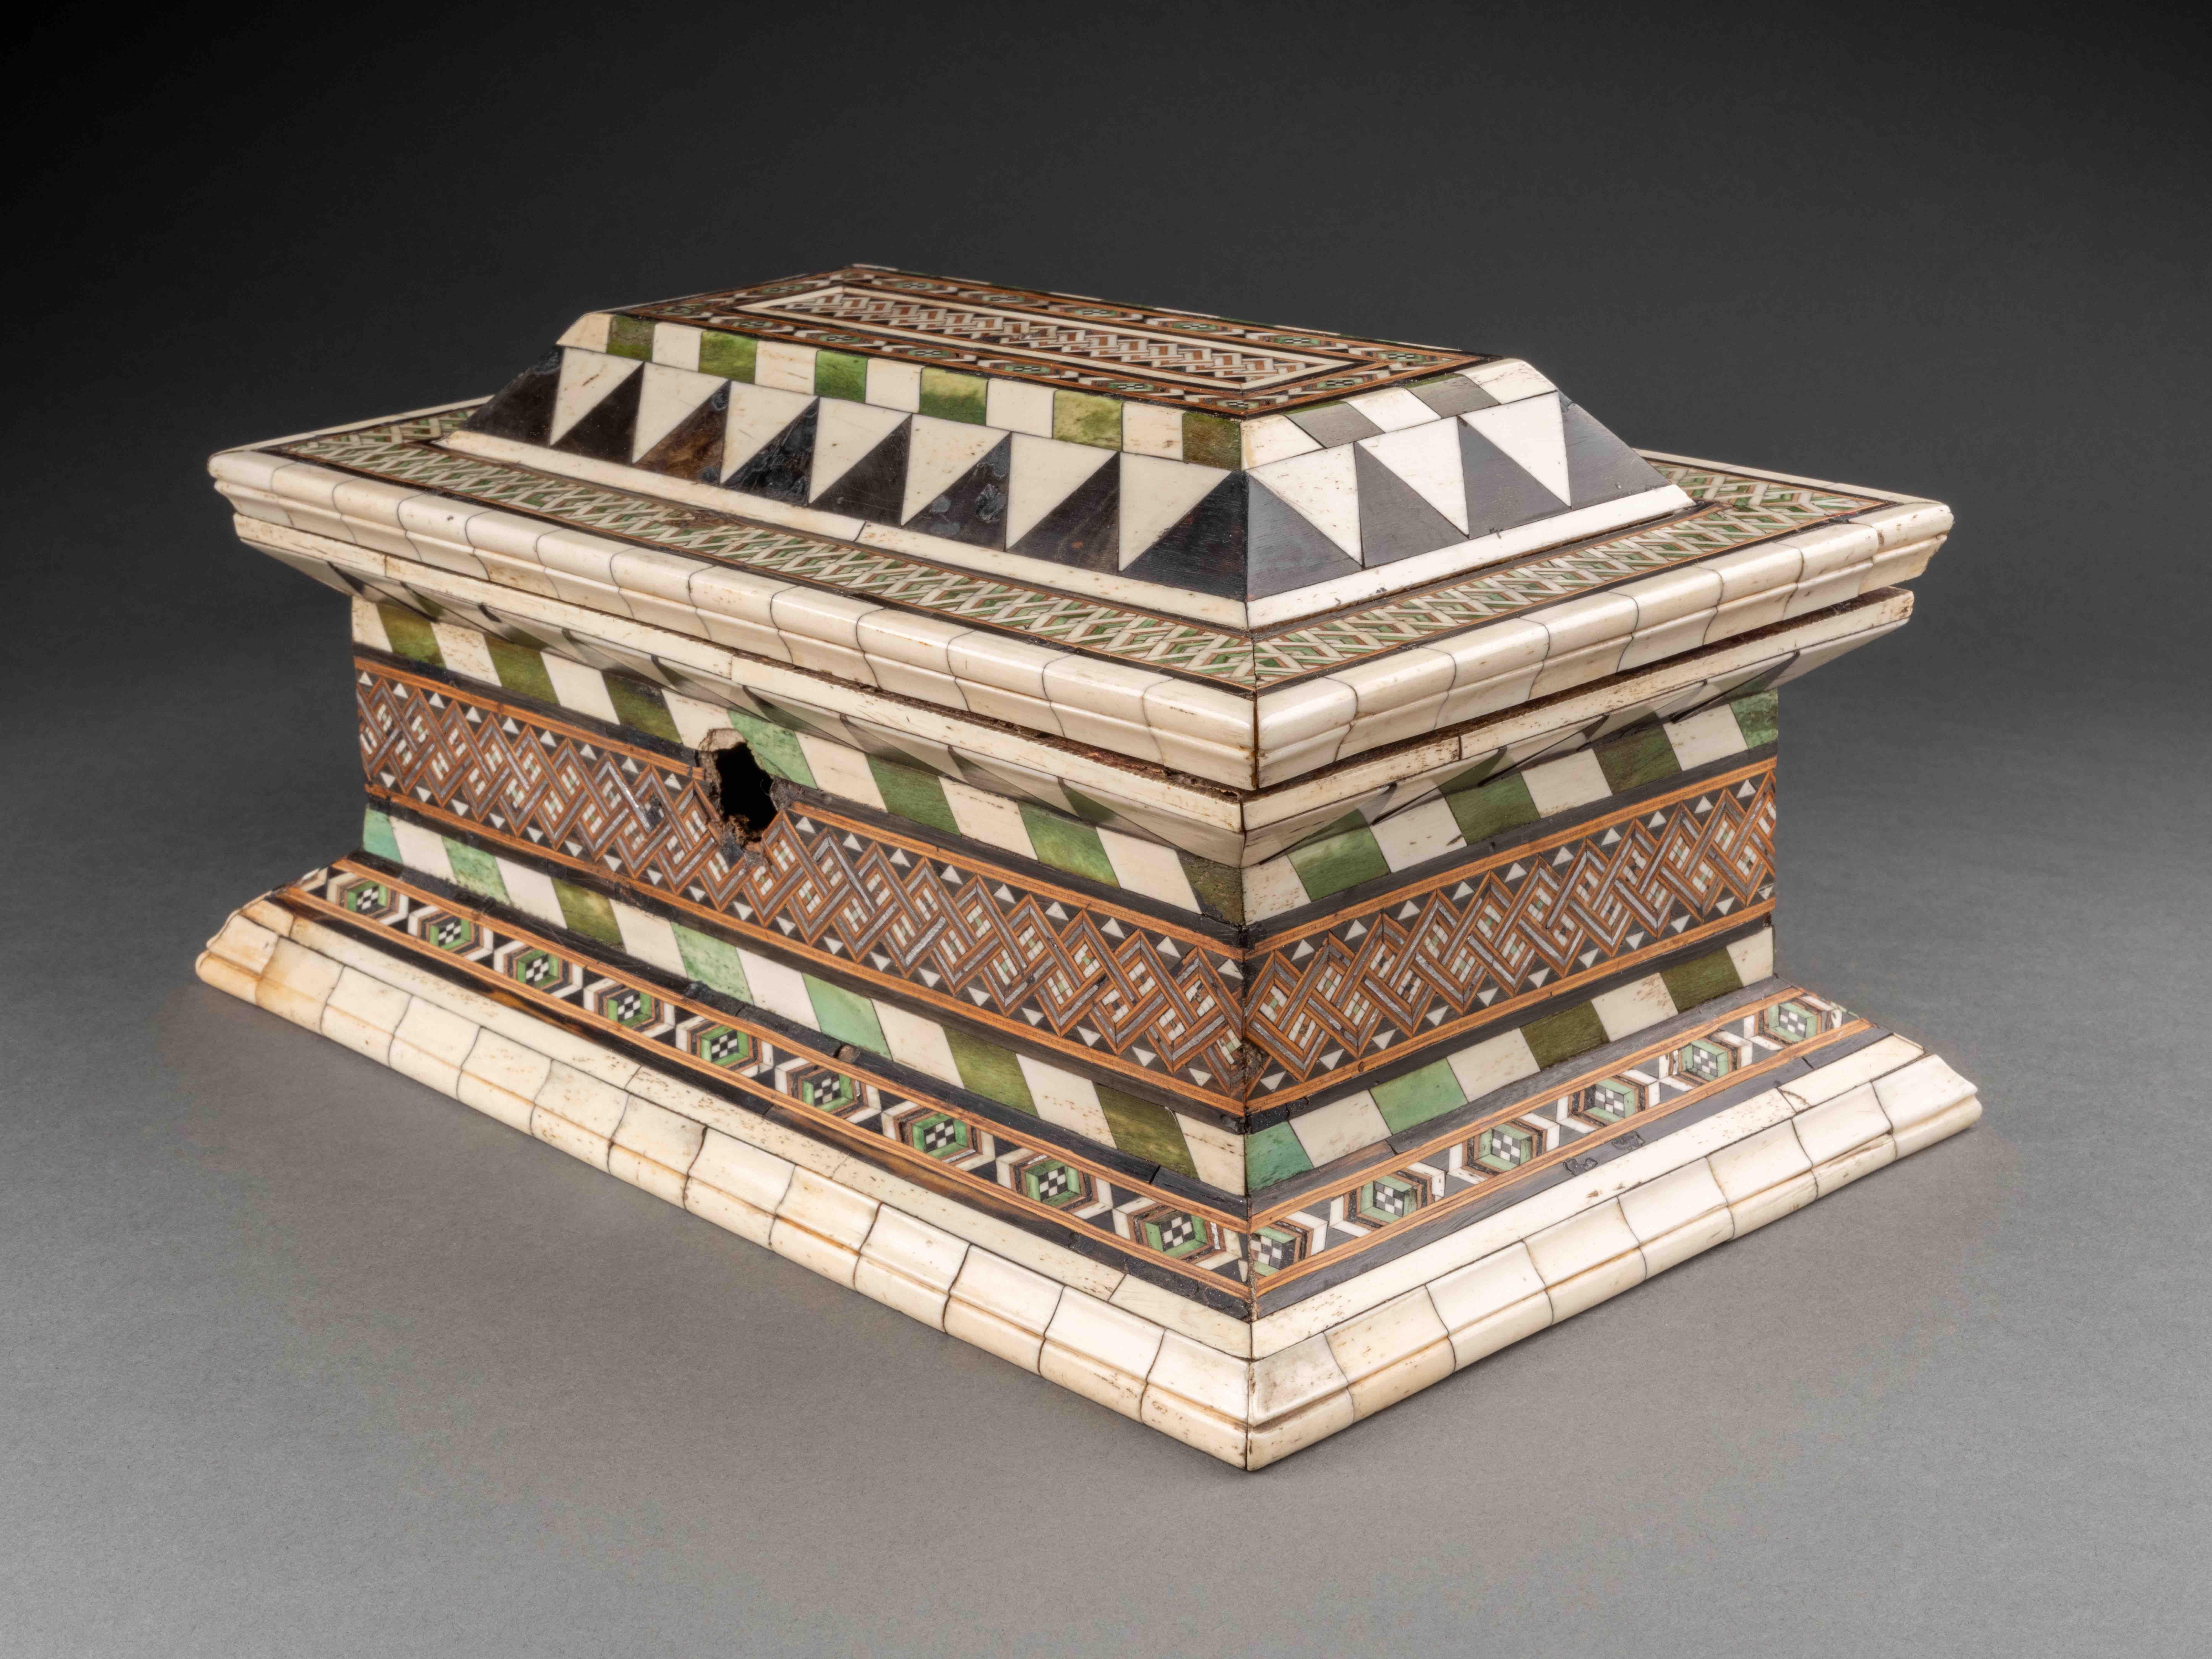 Embriachi workshop marquetry casket
Northern Italy, 15th century
Alla certosina inlays (bone, stained bone, pewter and wood)
H 28.2 x W 18 x D 14 cm

This beautiful casket of rectangular form is richly decorated with the characteristic geometric